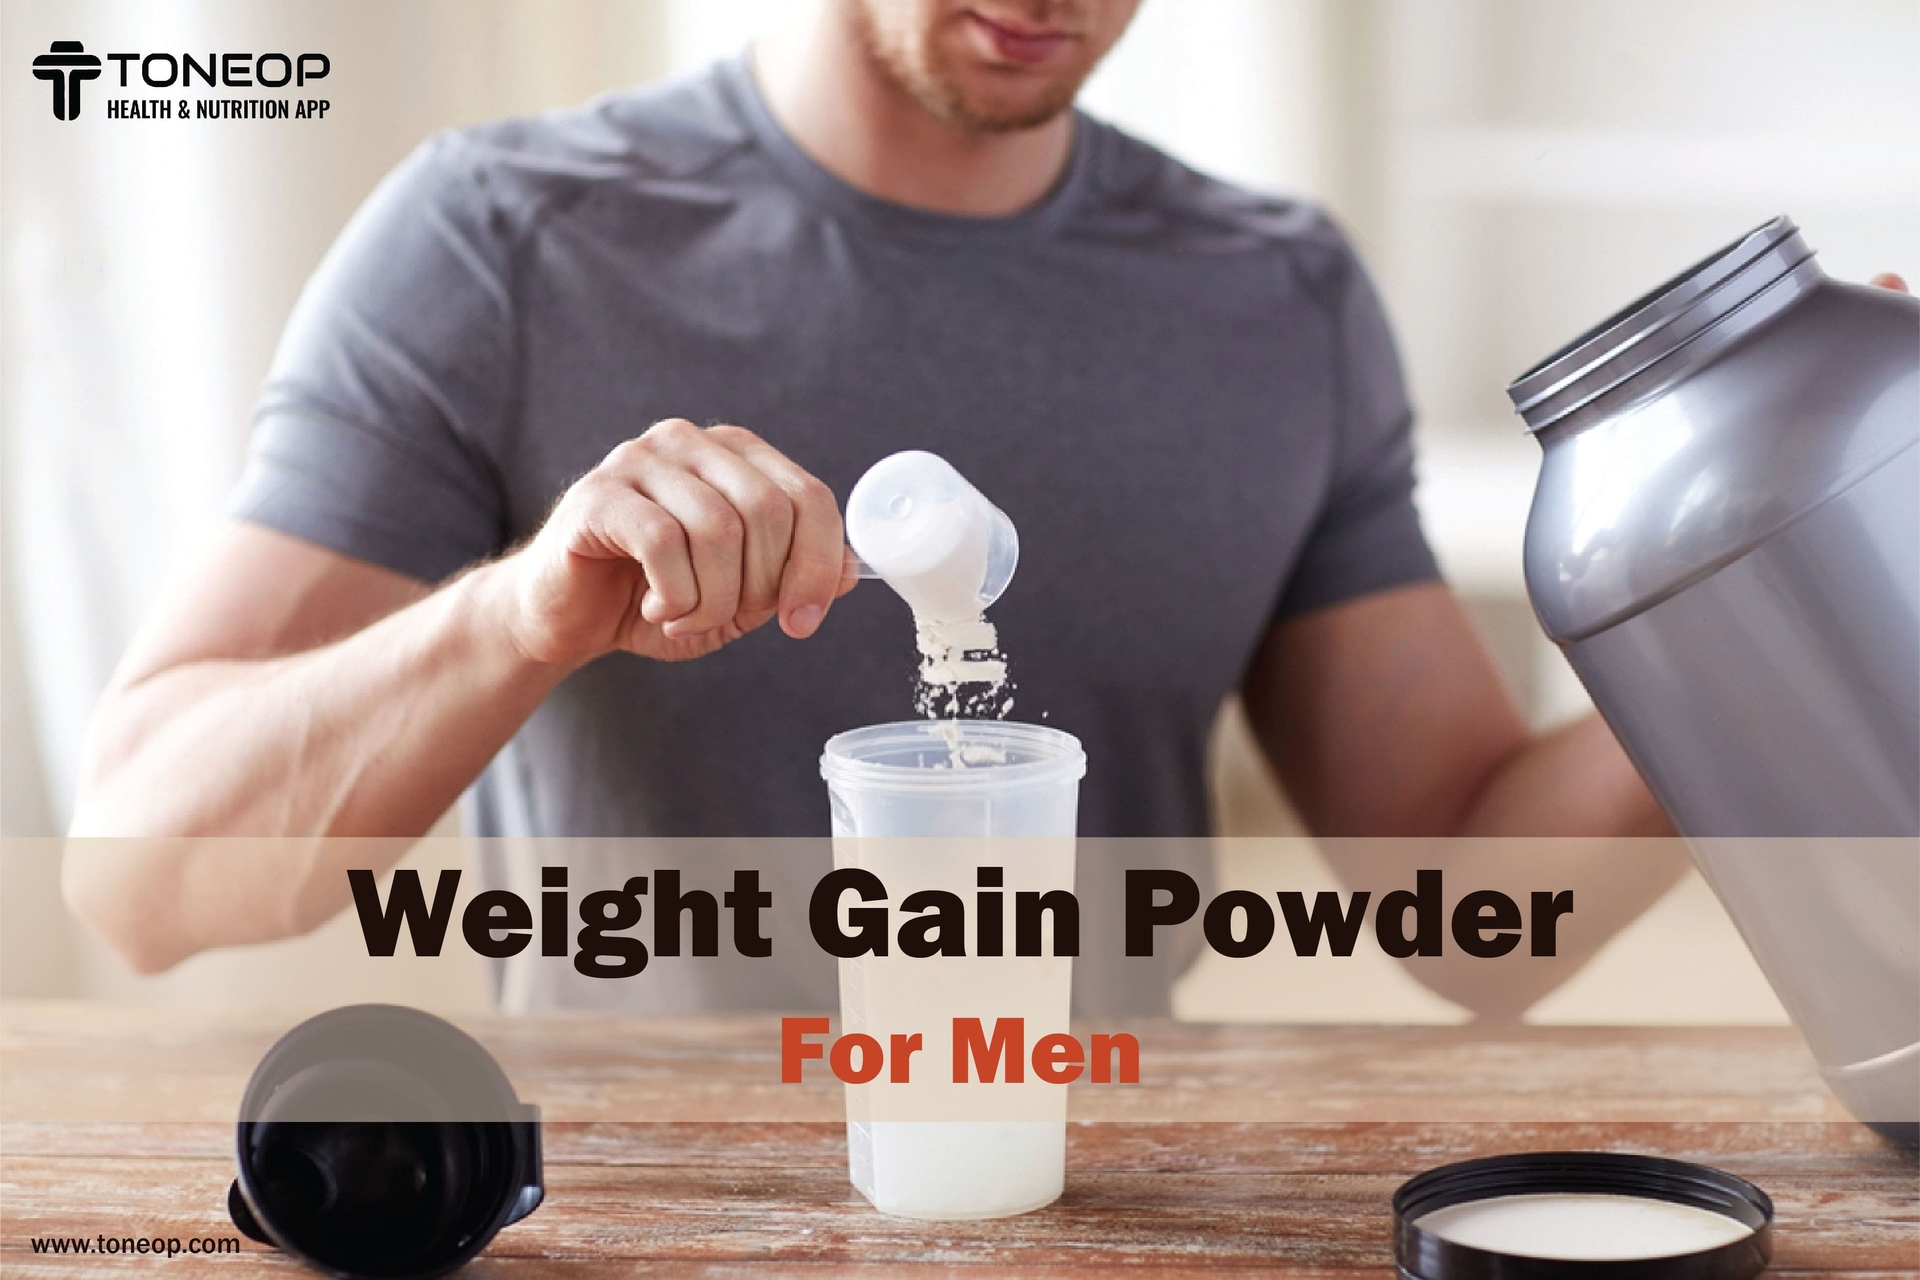 Weight Gain Powder For Men: Here Is What You Need To Know